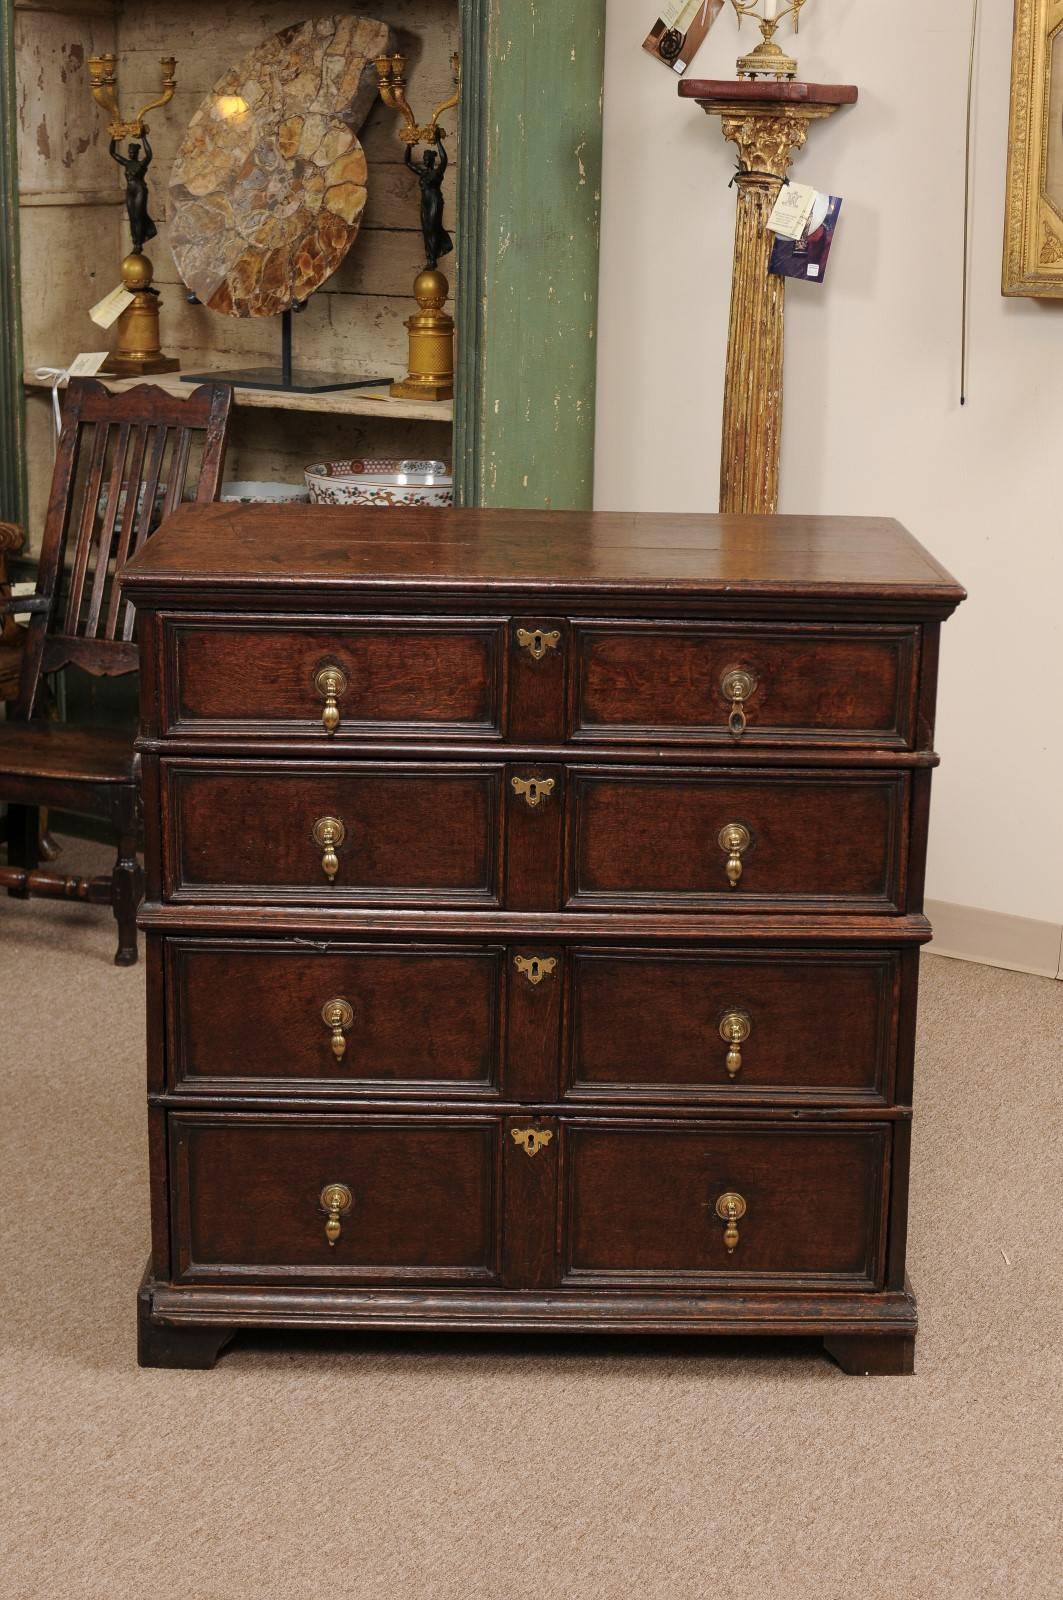 Jacobean style chest of drawers in oak with four graduated drawers featuring brass tear drop pulls, England, 18th century.